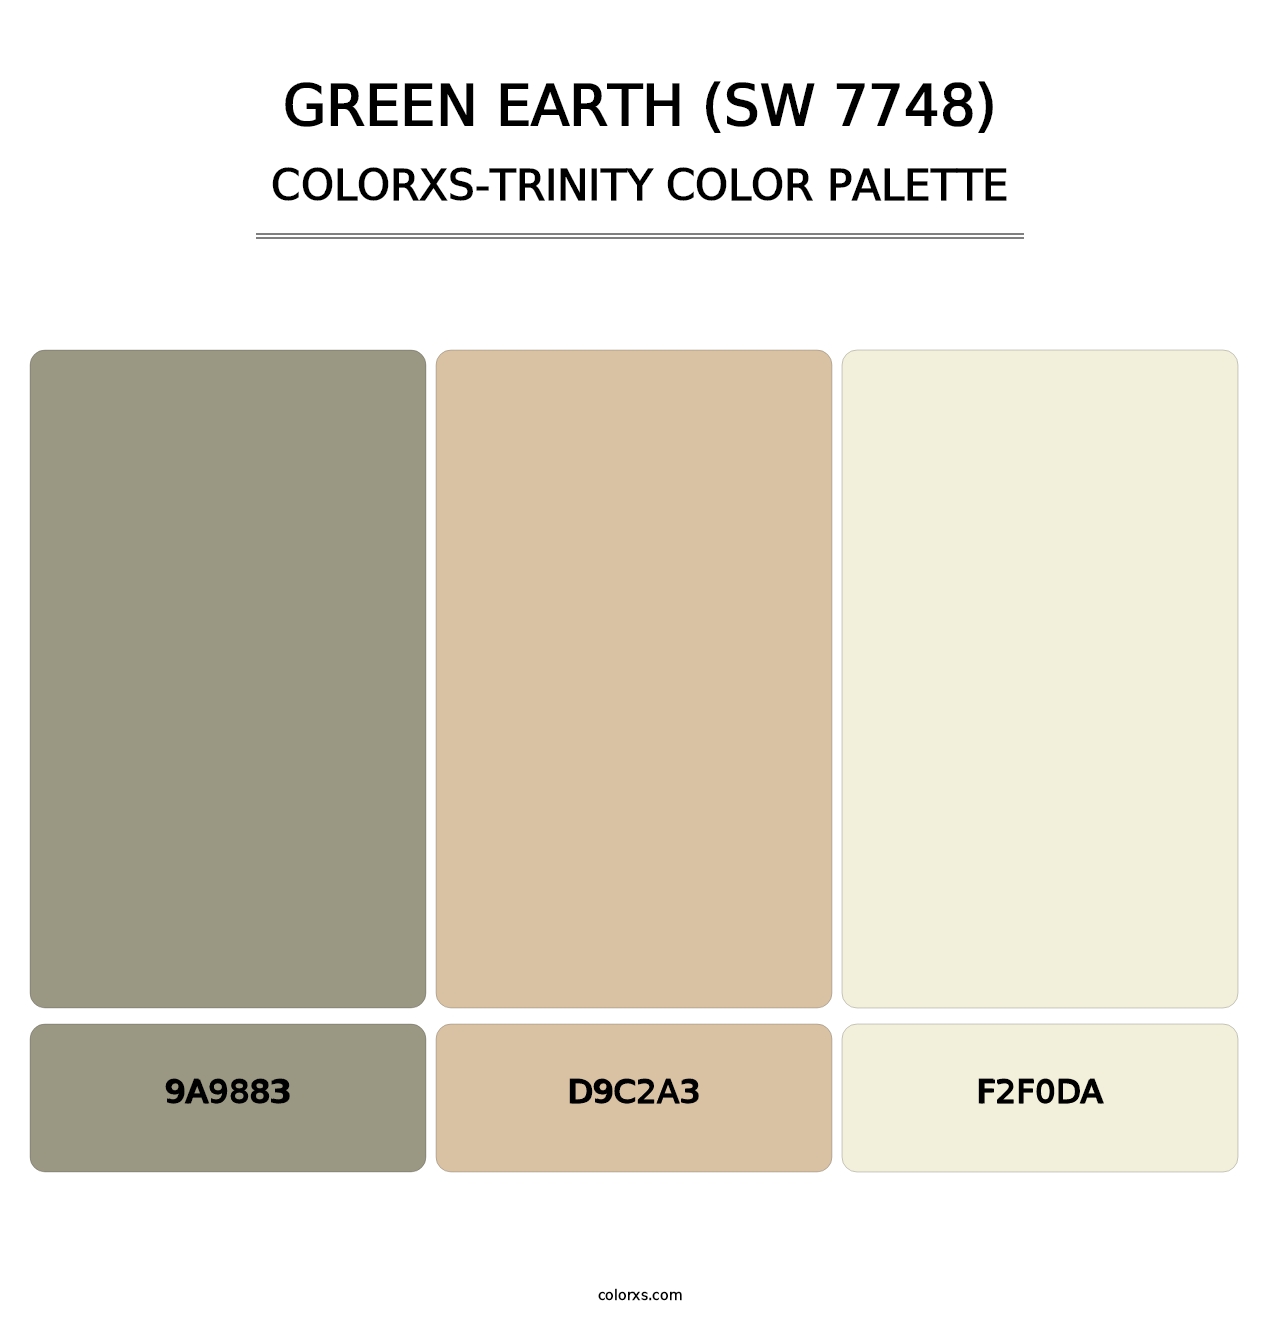 Green Earth (SW 7748) - Colorxs Trinity Palette